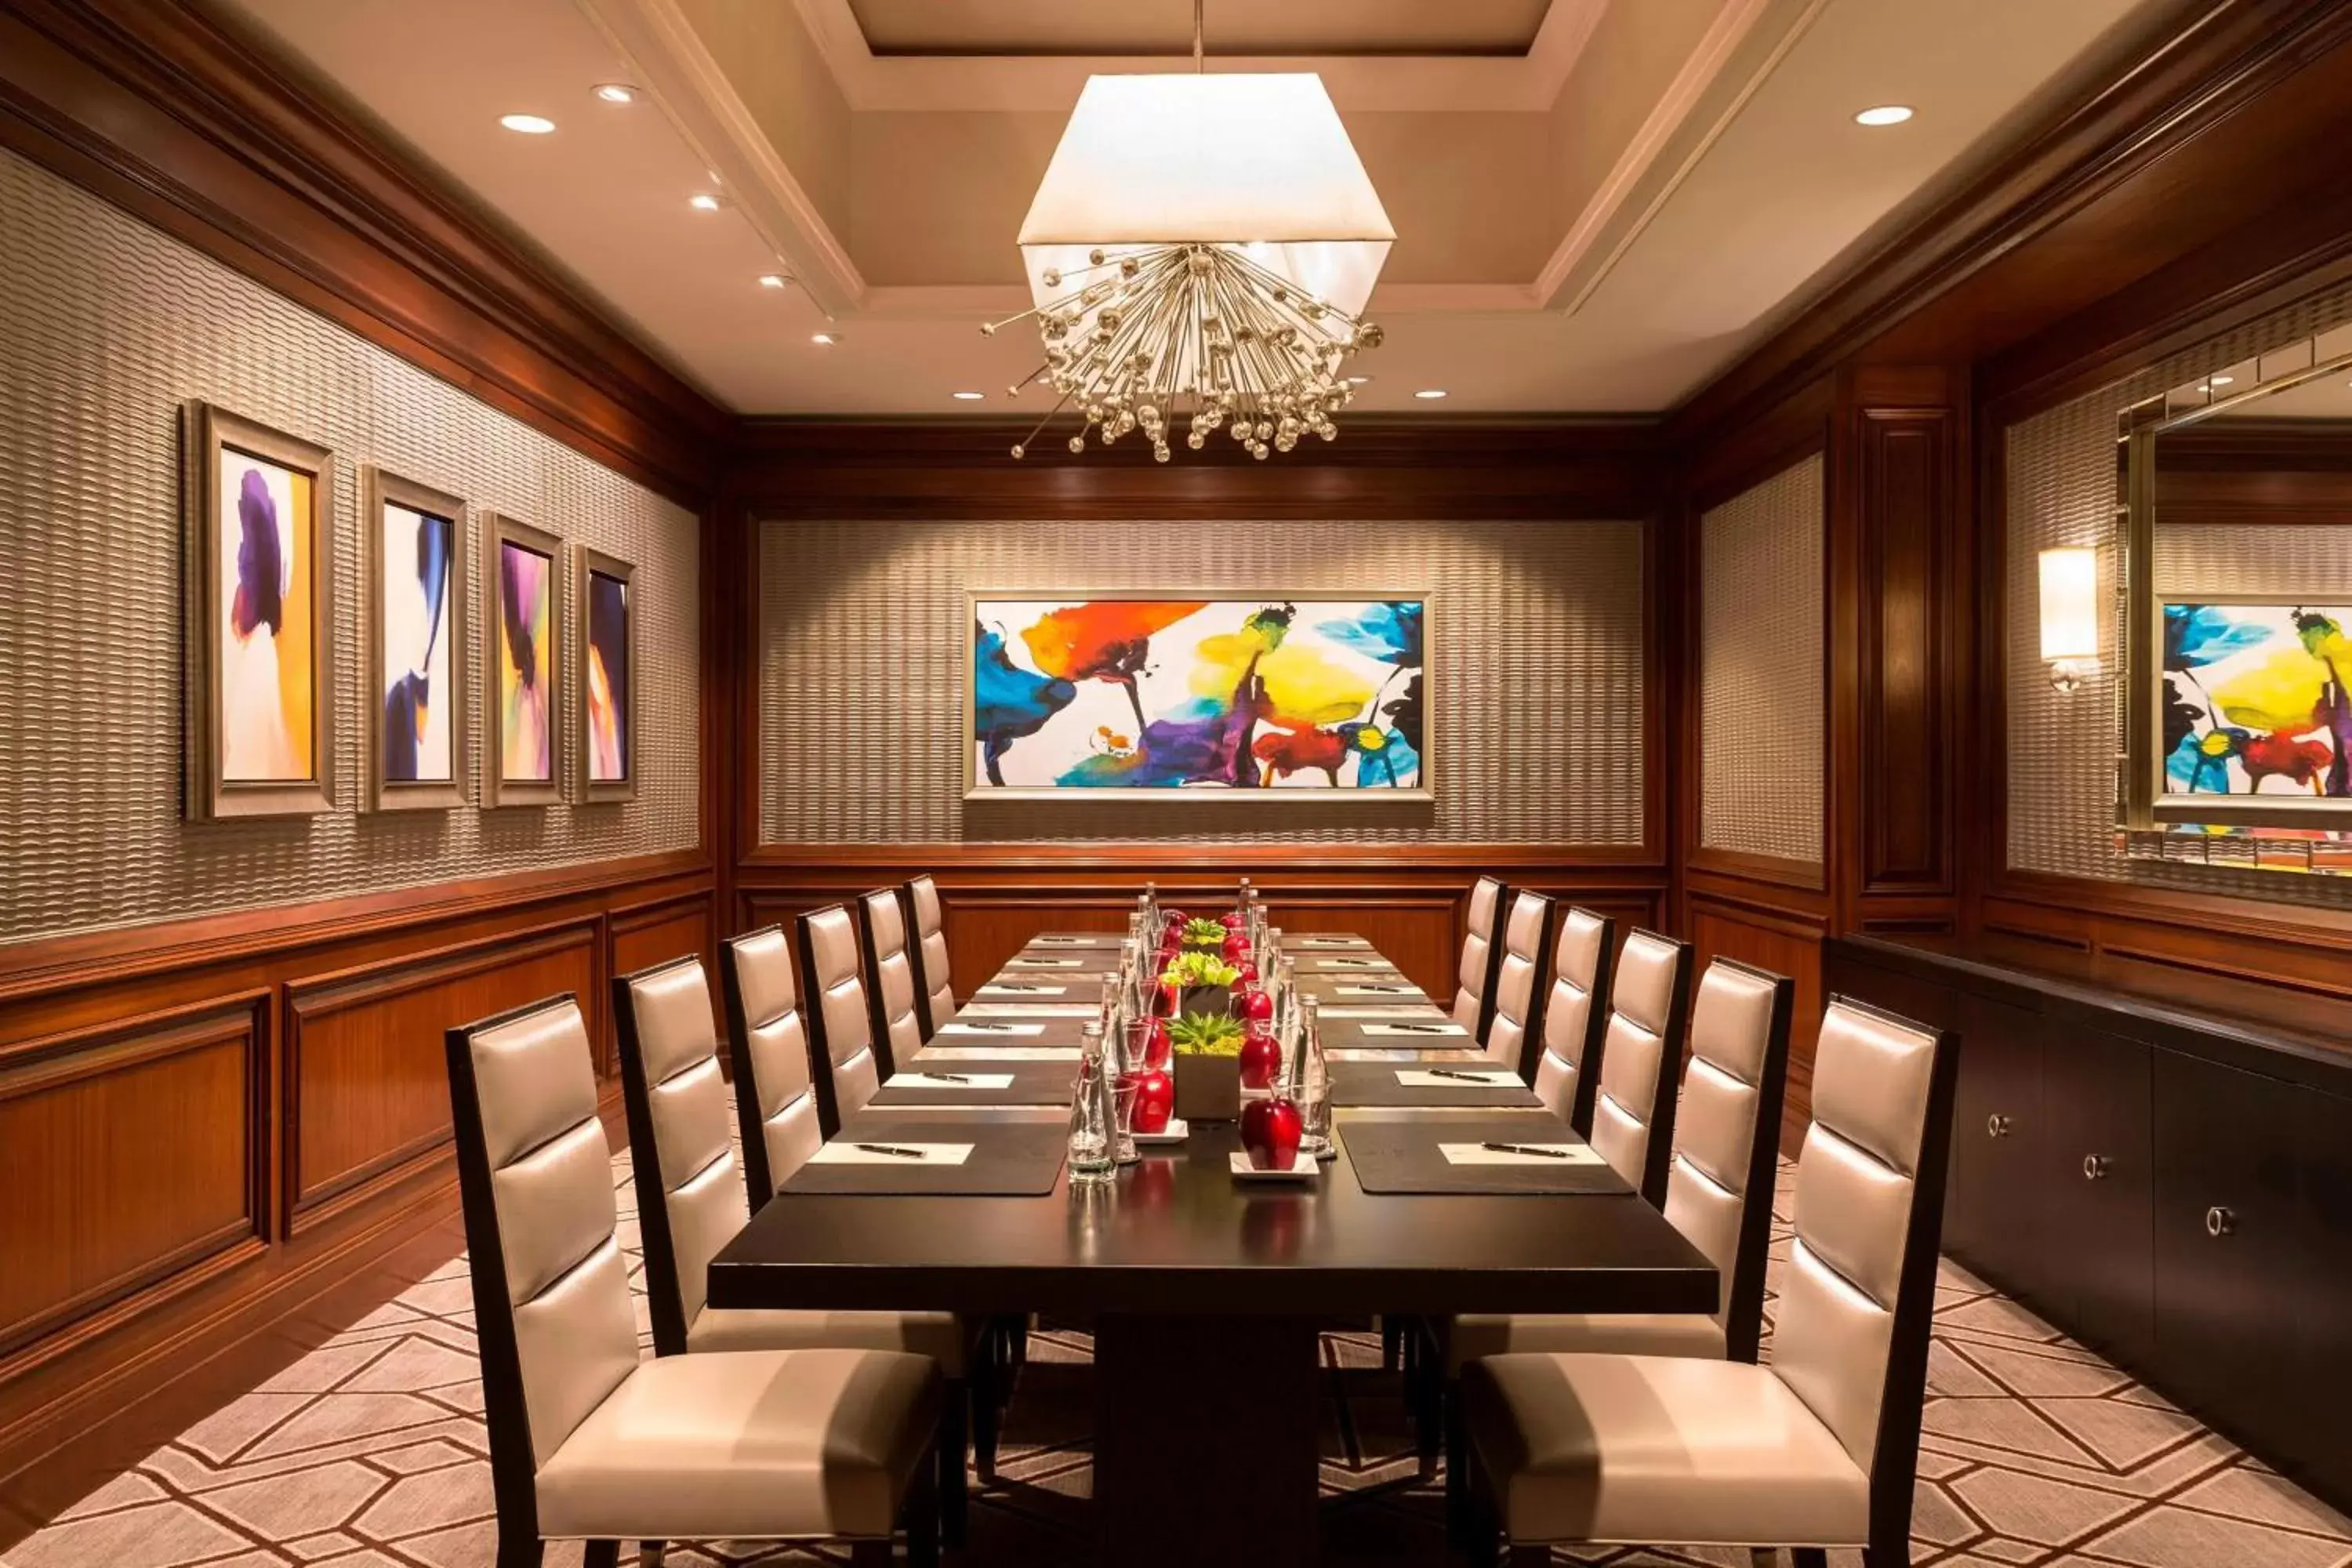 Meeting/conference room in The Ritz-Carlton, Tysons Corner